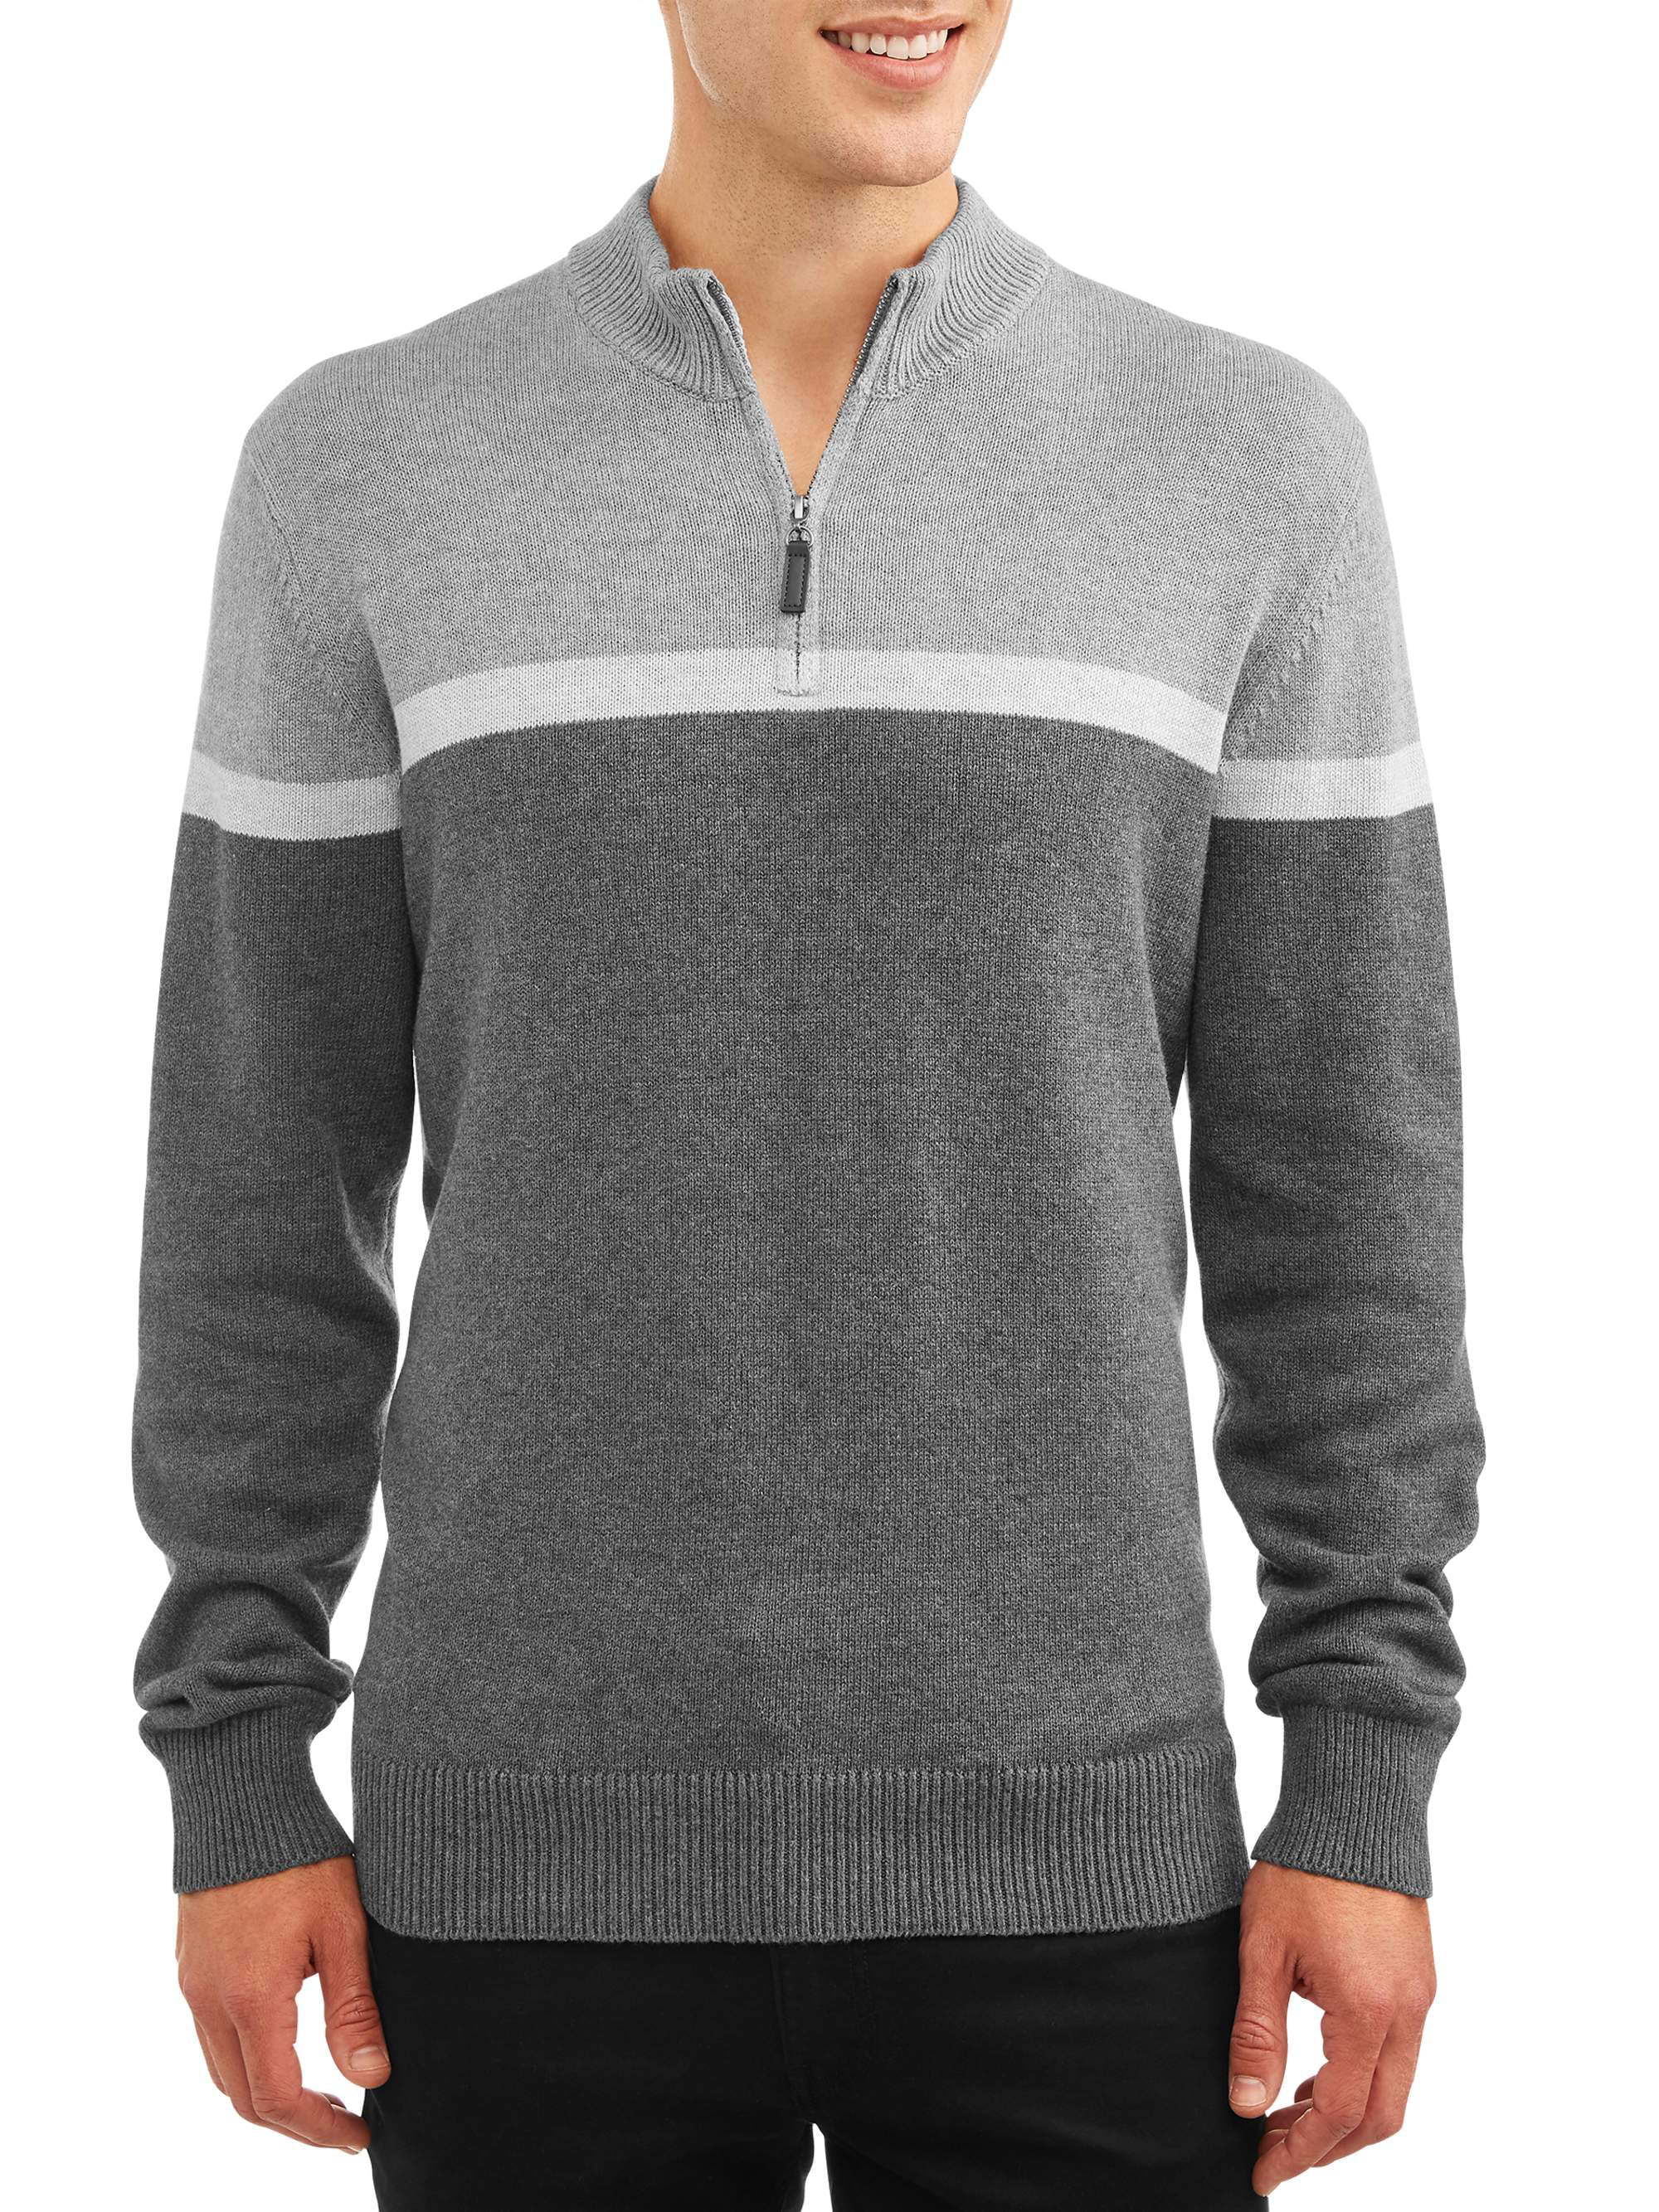 George Men's and Big Men's Quarter Zip Sweater, up to Size 5XL ...